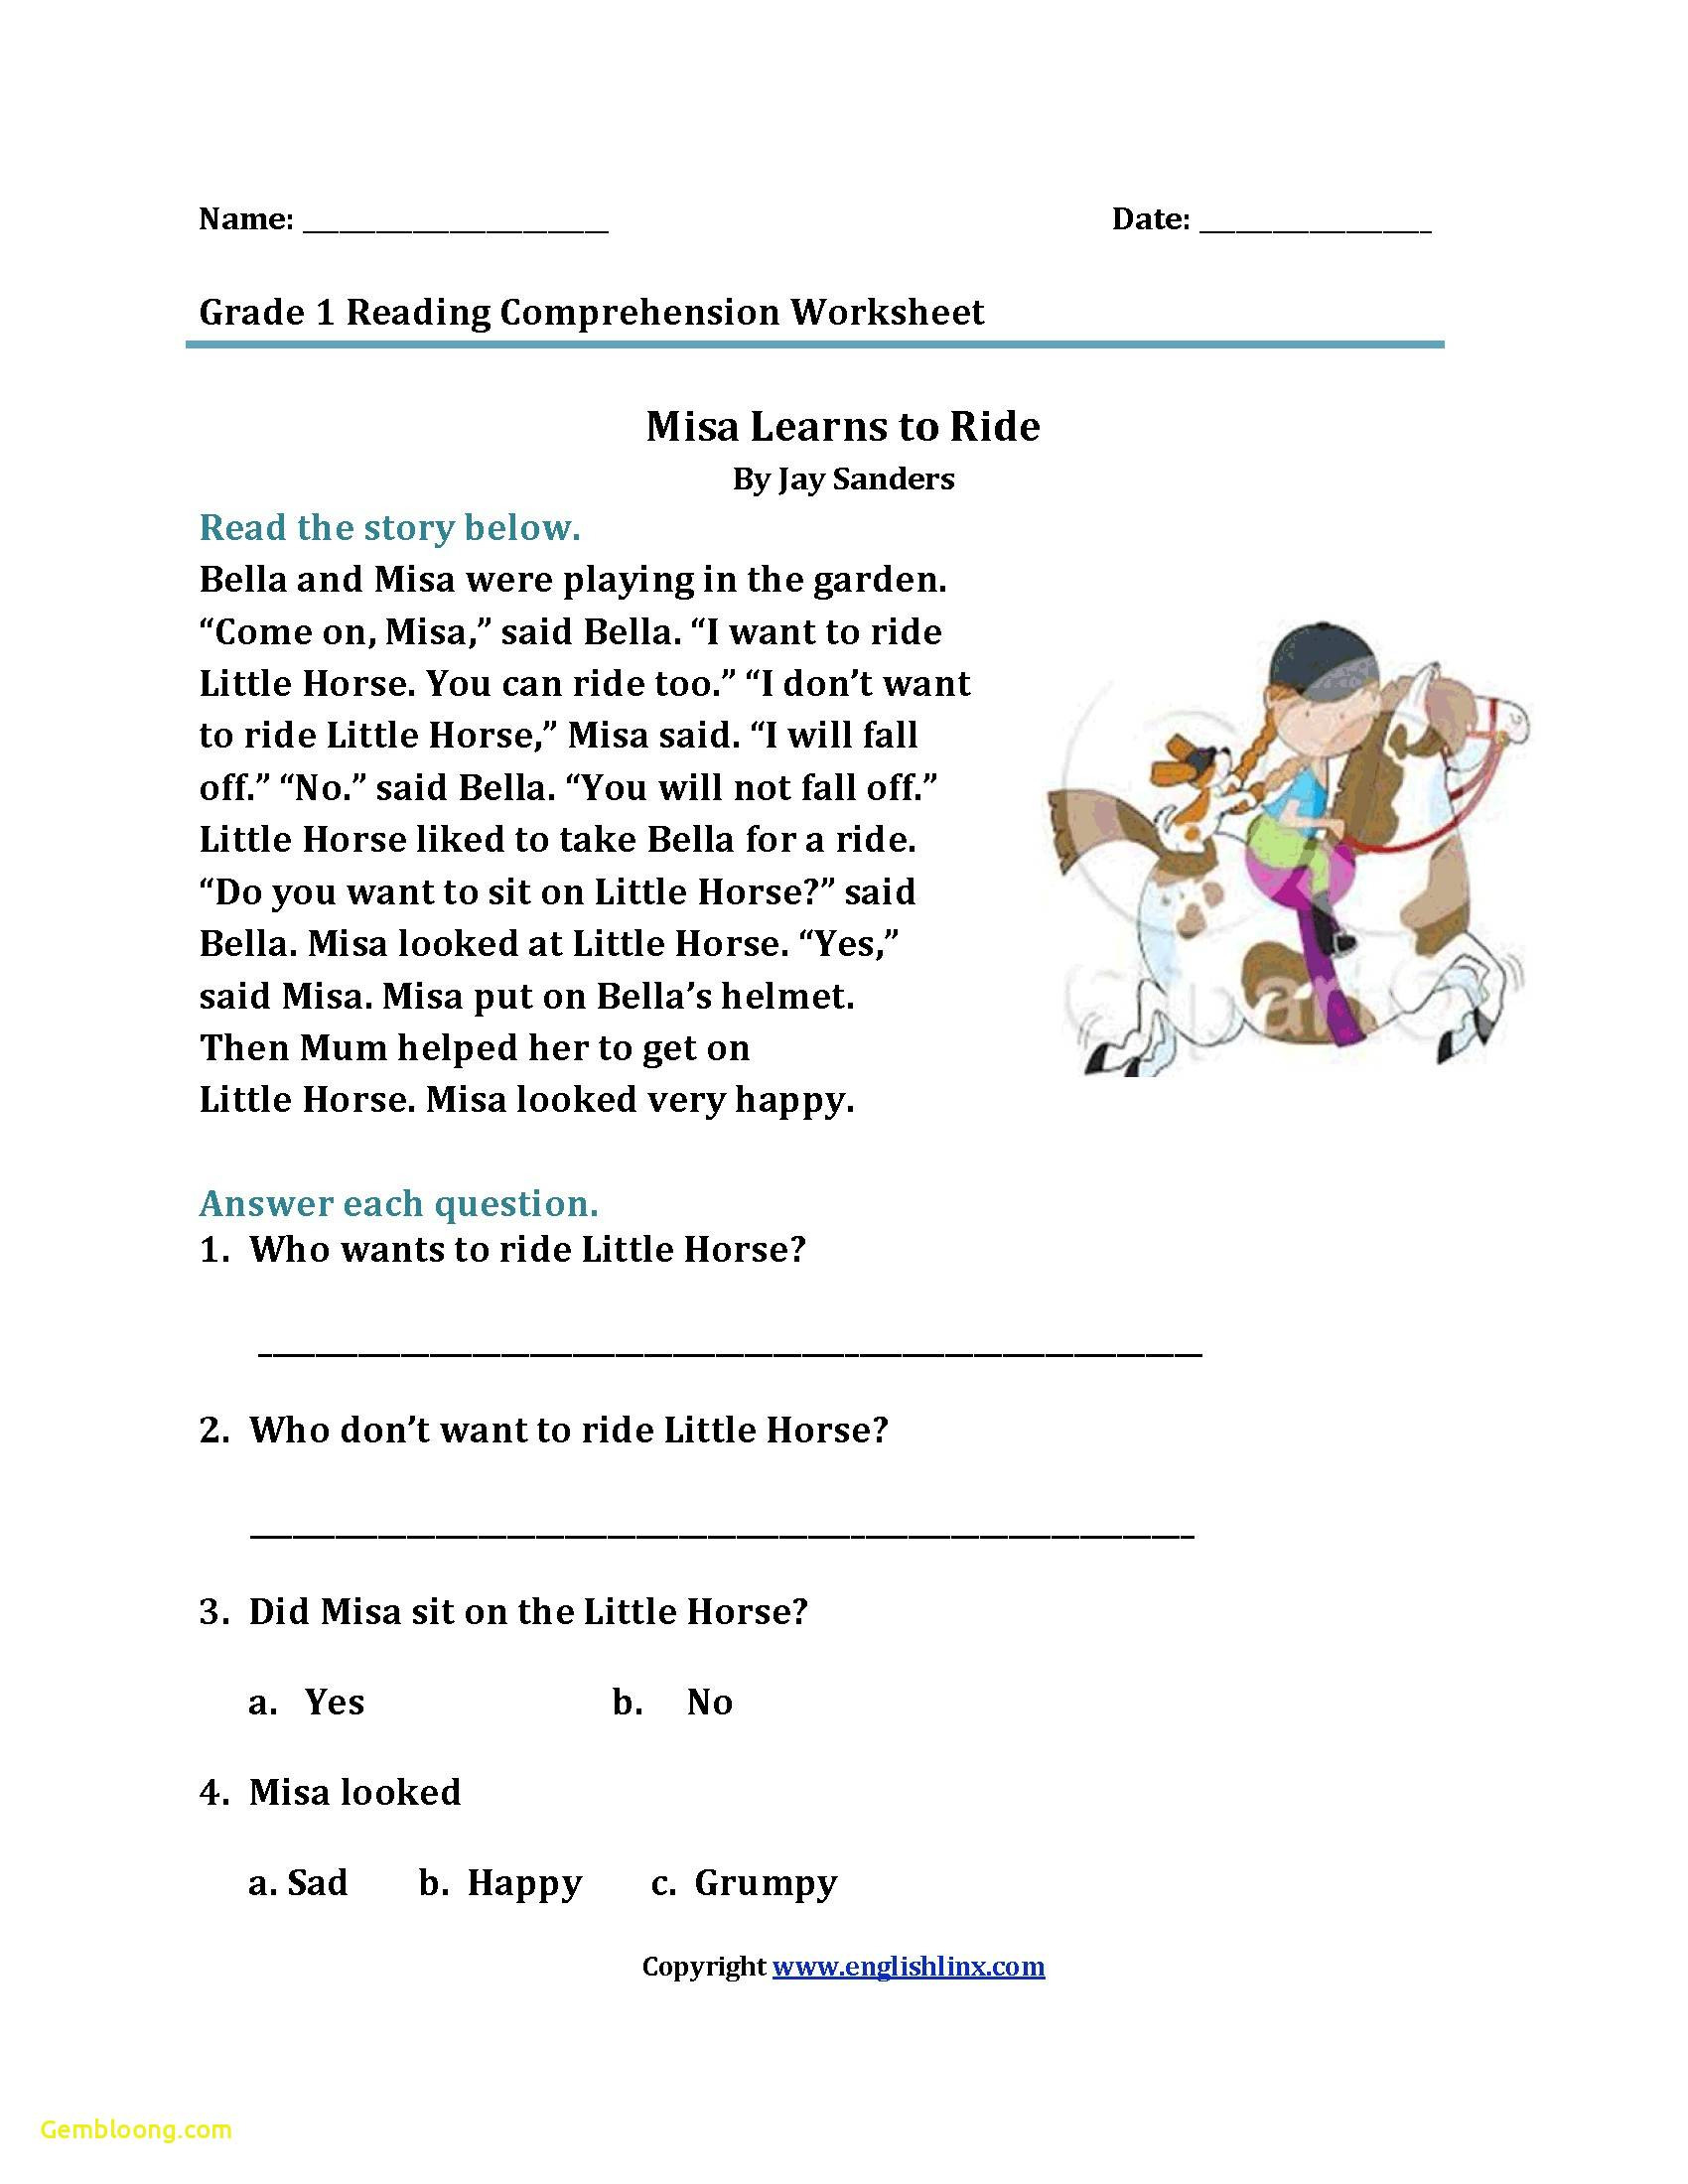 free-printable-reading-comprehension-worksheets-for-middle-school-pin